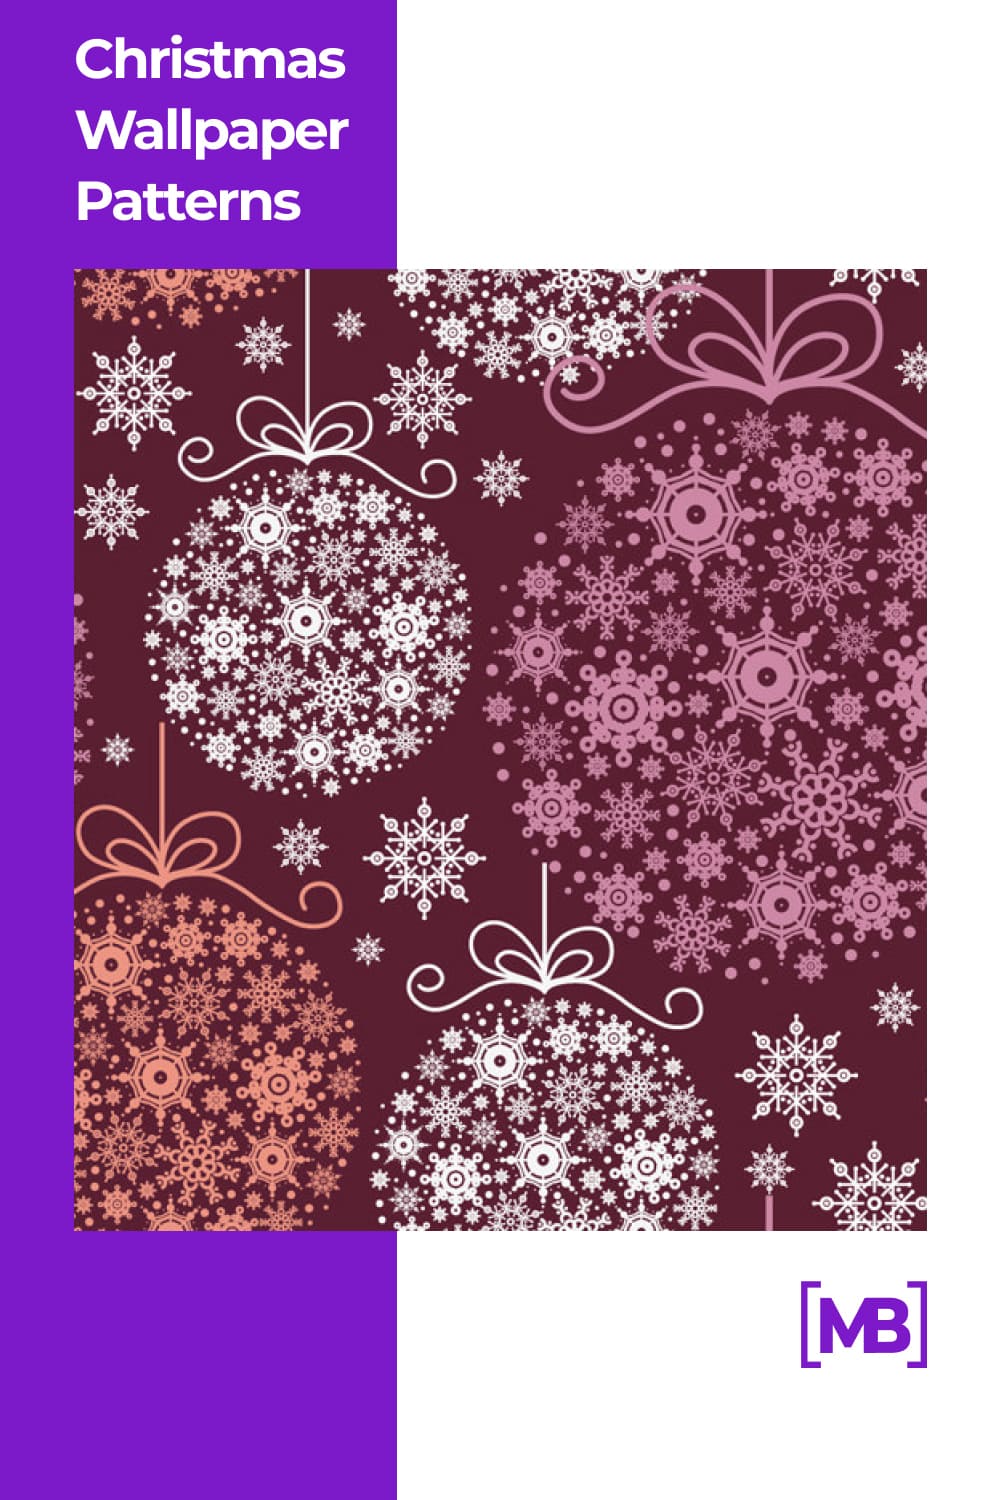 Print in the form of Christmas tree decorations made of small snowflakes.